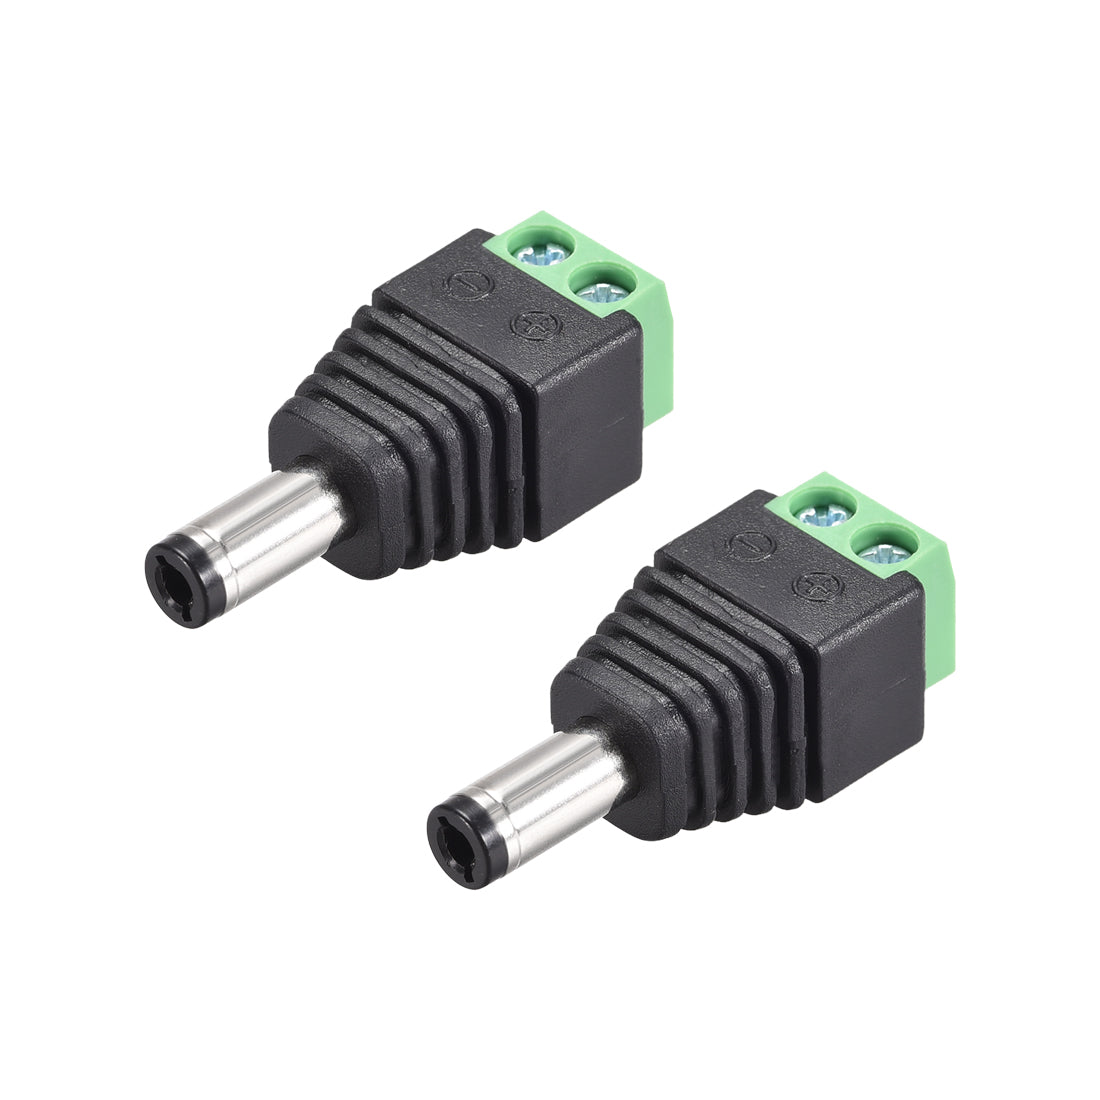 uxcell Uxcell 2Pcs 5.5x2.5mm DC Power Jack Plug Adapter Connector for Led Strip CCTV Camera Cable Wire Ends